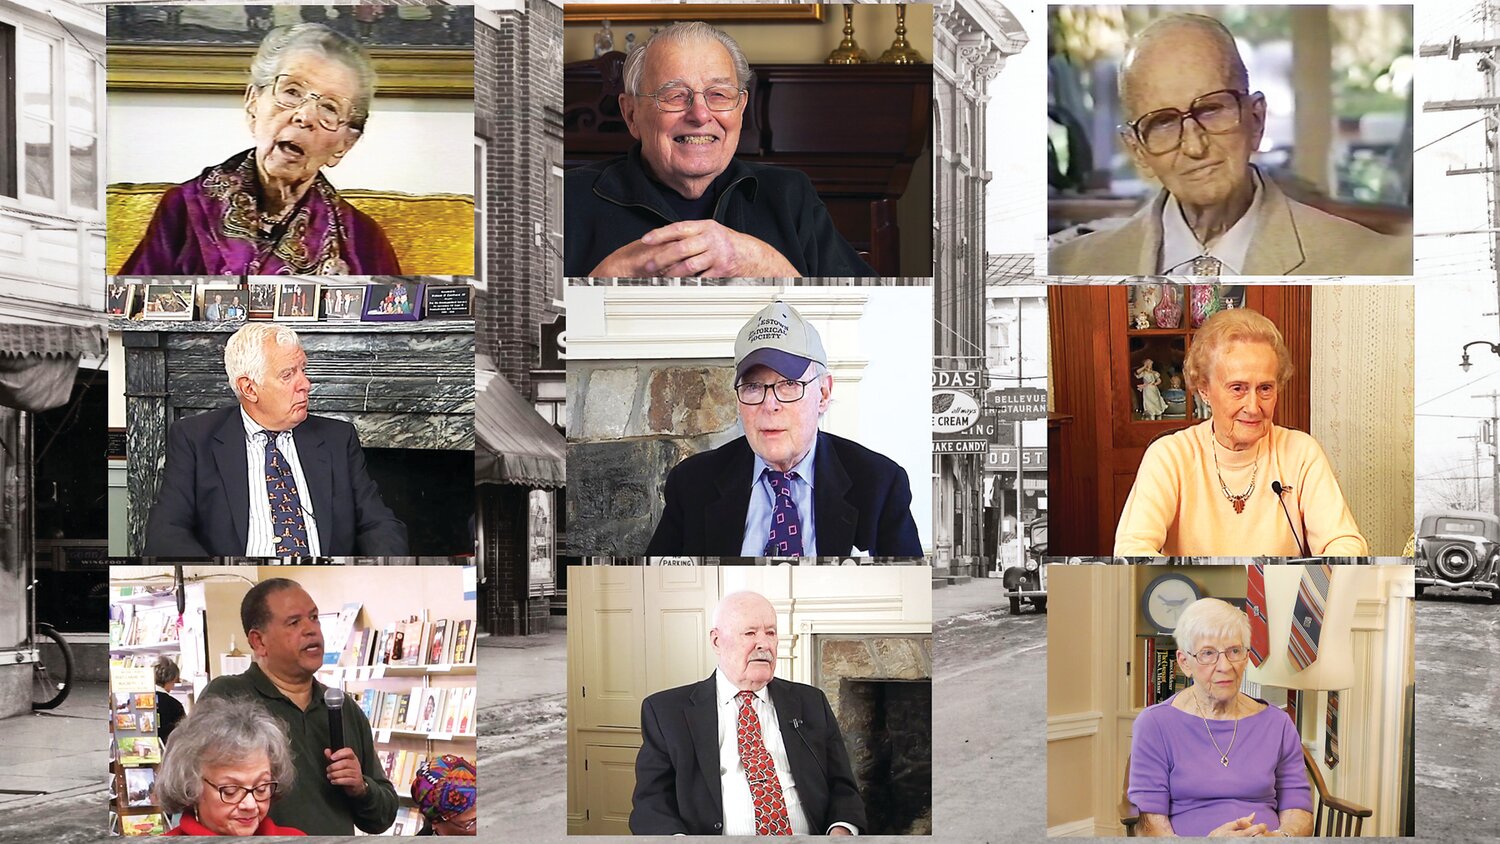 A collage shows various interviews, conducted by the Doylestown Historical Society, of past Doylestonians recalling their experiences in Doylestown.